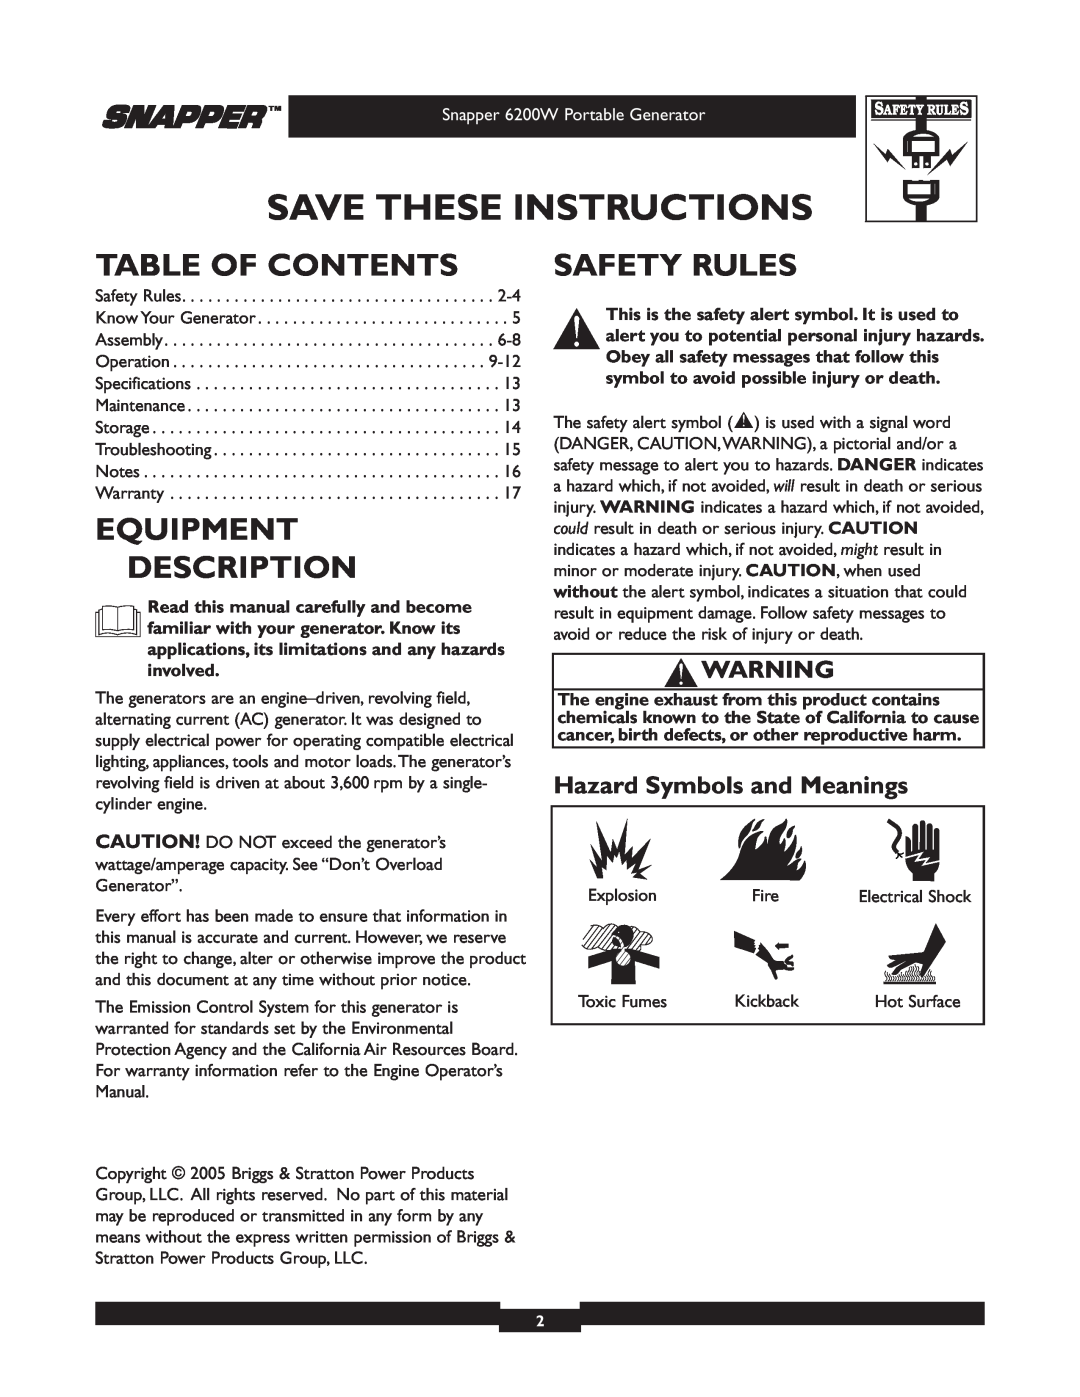 Snapper 30216 Table Of Contents, Equipment Description, Safety Rules, Hazard Symbols and Meanings, Save These Instructions 